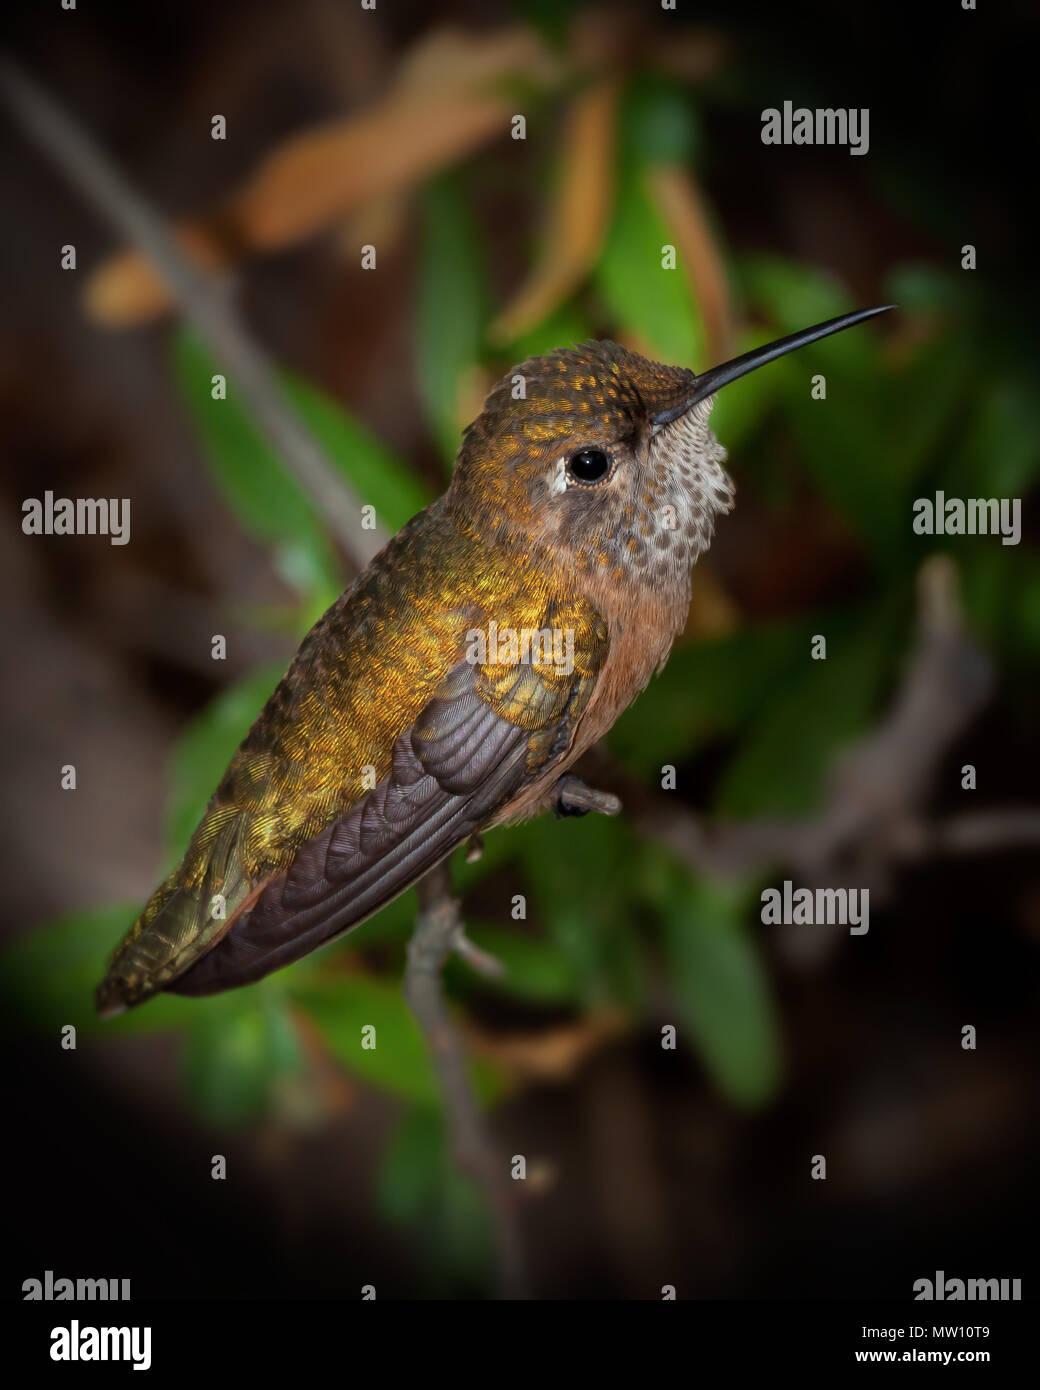 Hummingbird with Irridescent Feathers Stock Photo